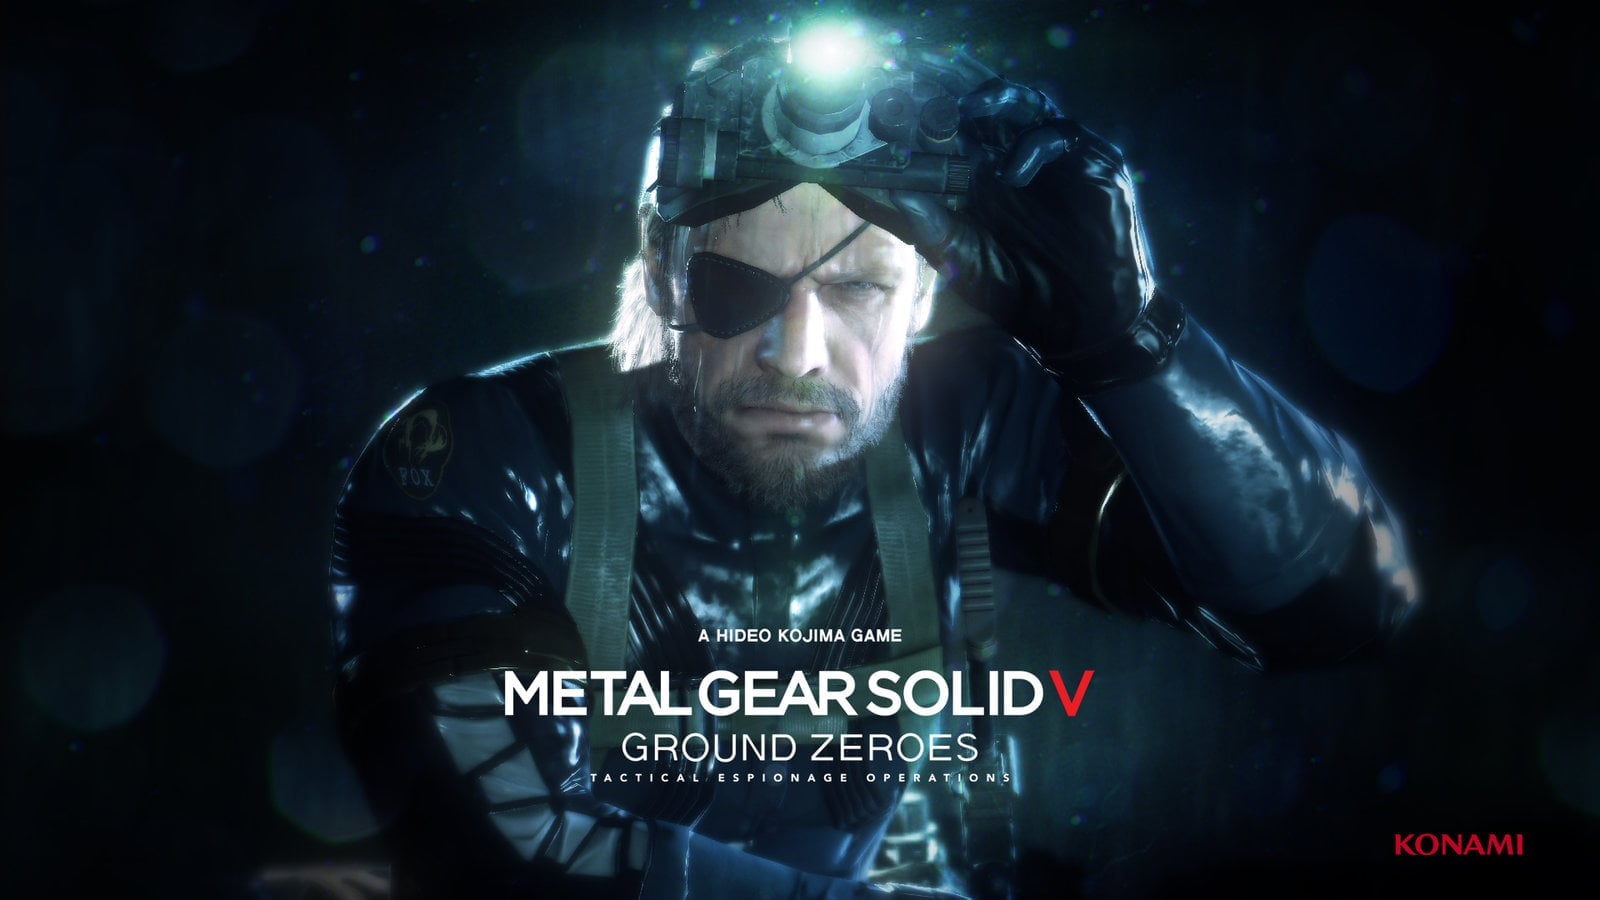 Metal Gear Solid 5 The Phantom Pain Images - Metal Gear Solid 5 Ground Zeroes Mision - HD Wallpaper 